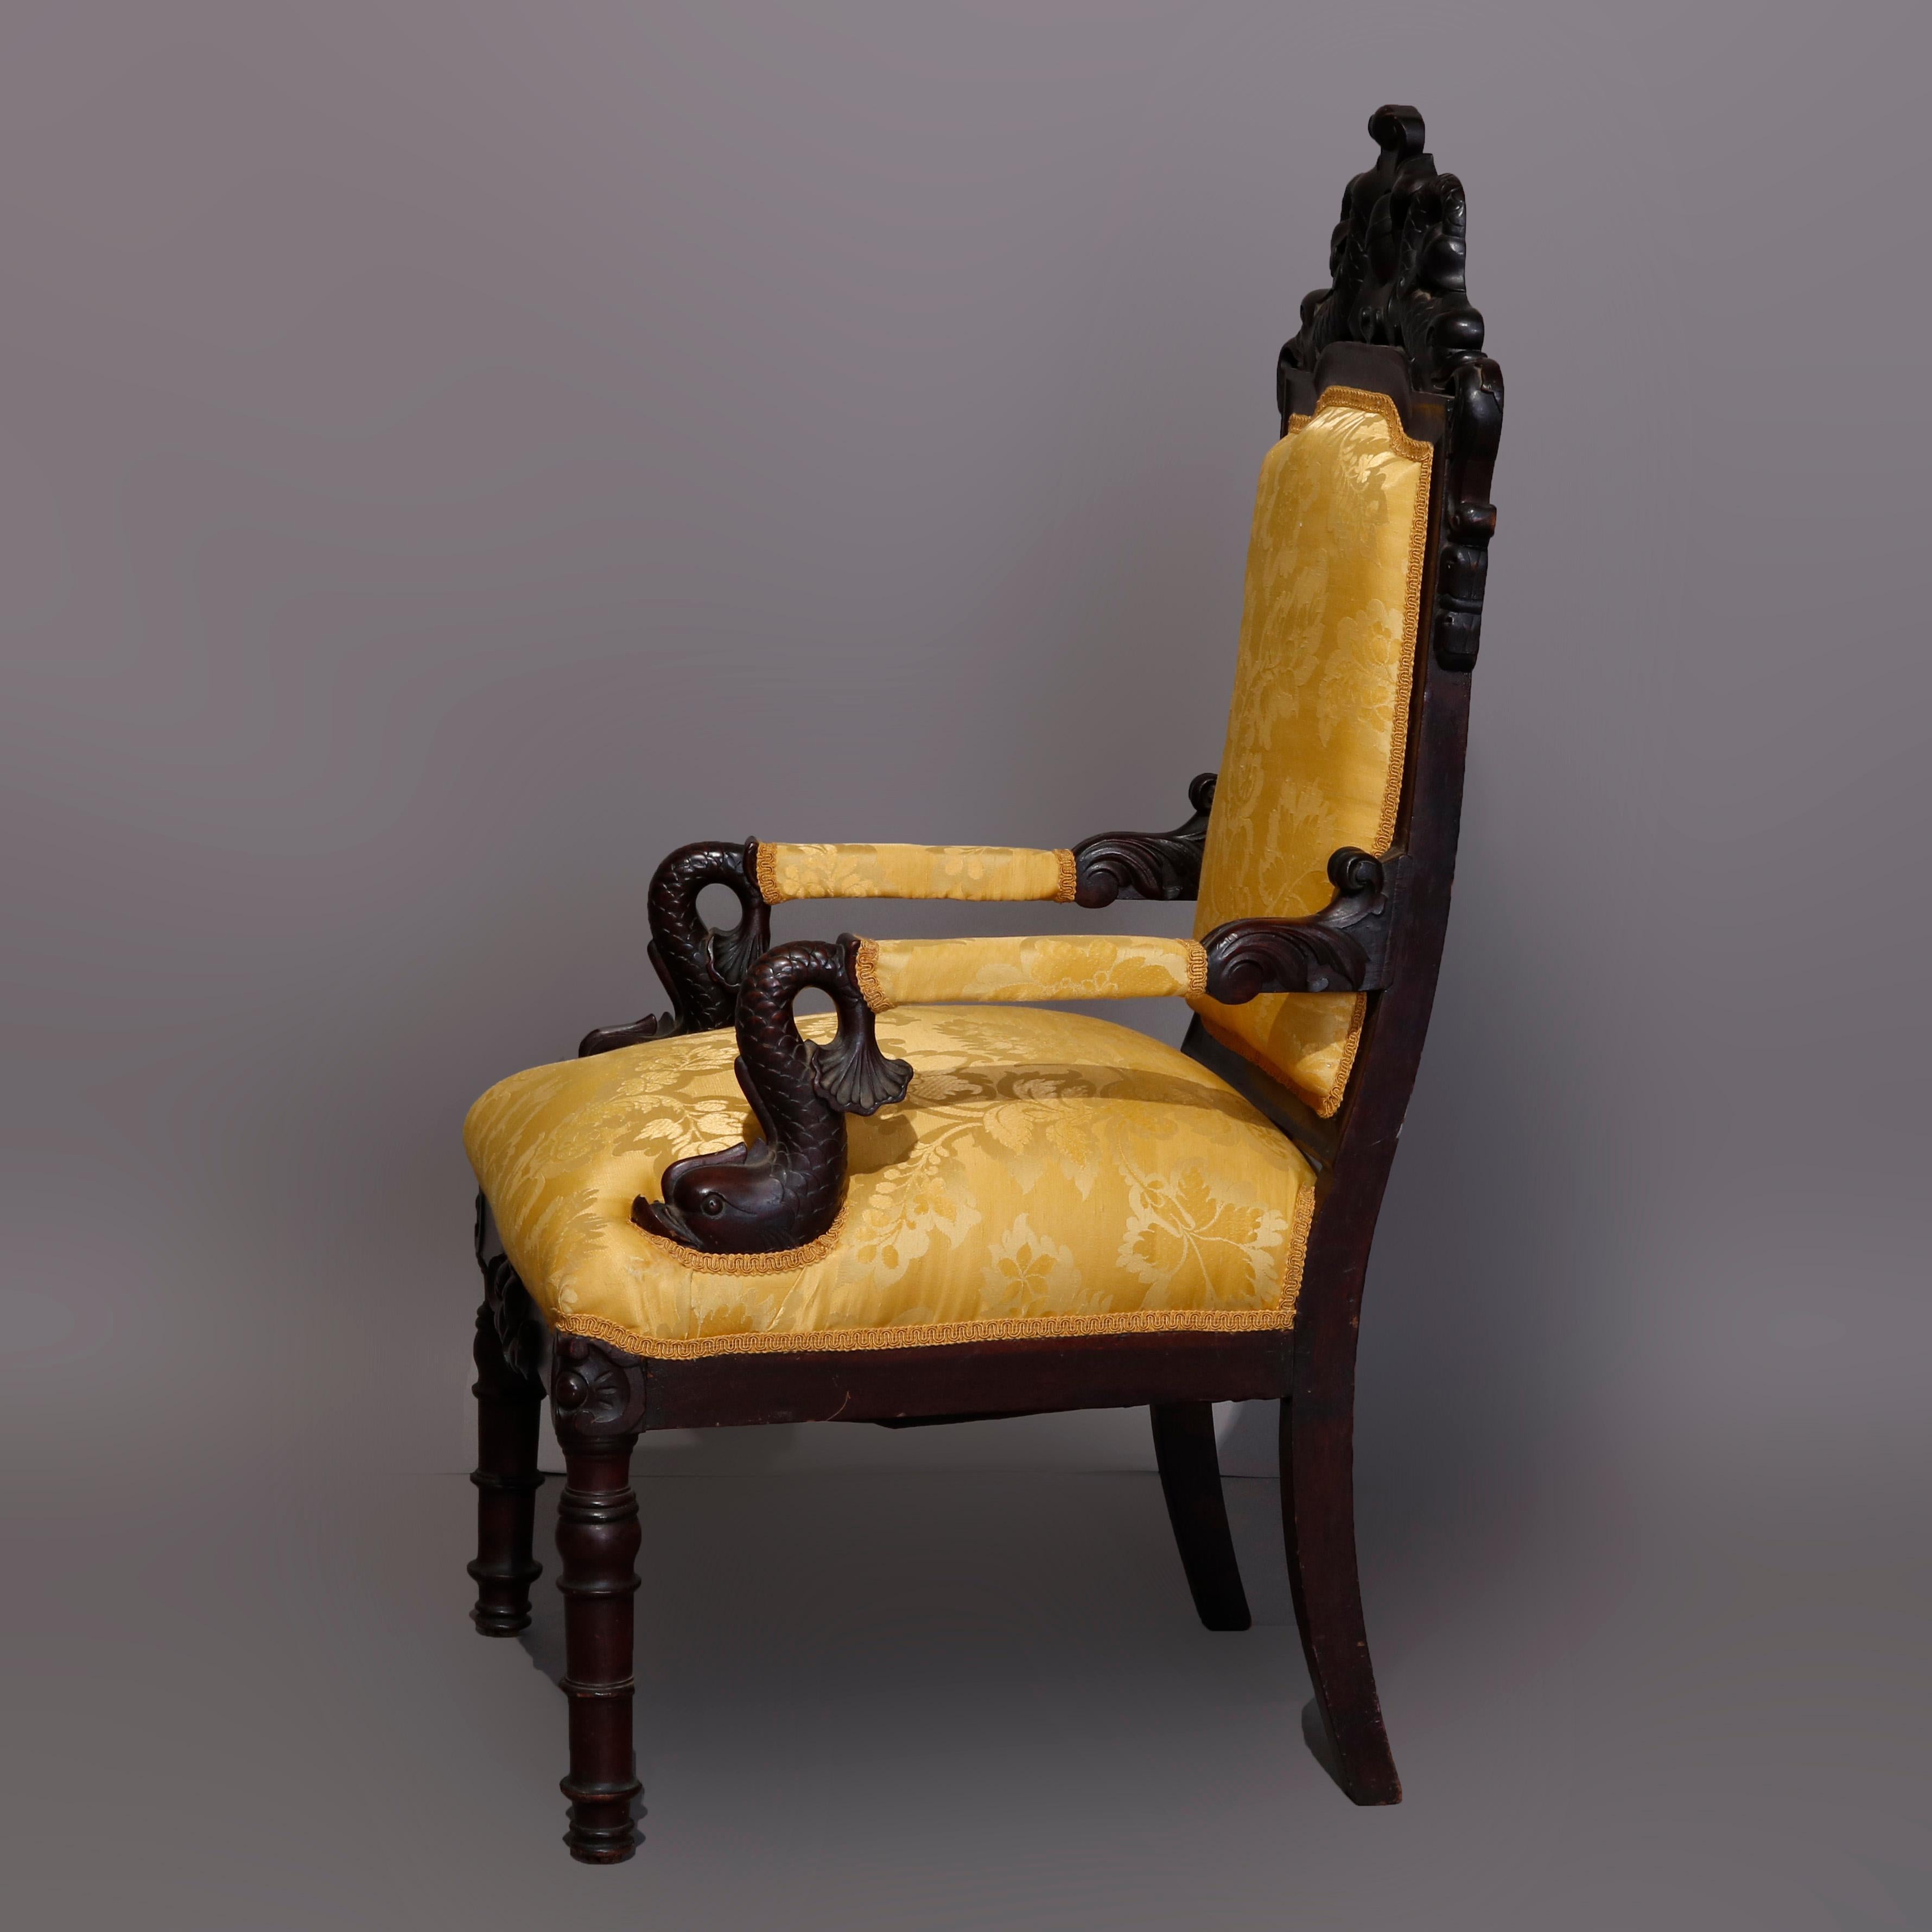 European Figural Baroque Style Carved Rosewood Armchair, Fleur-de-Lis and Dolphins